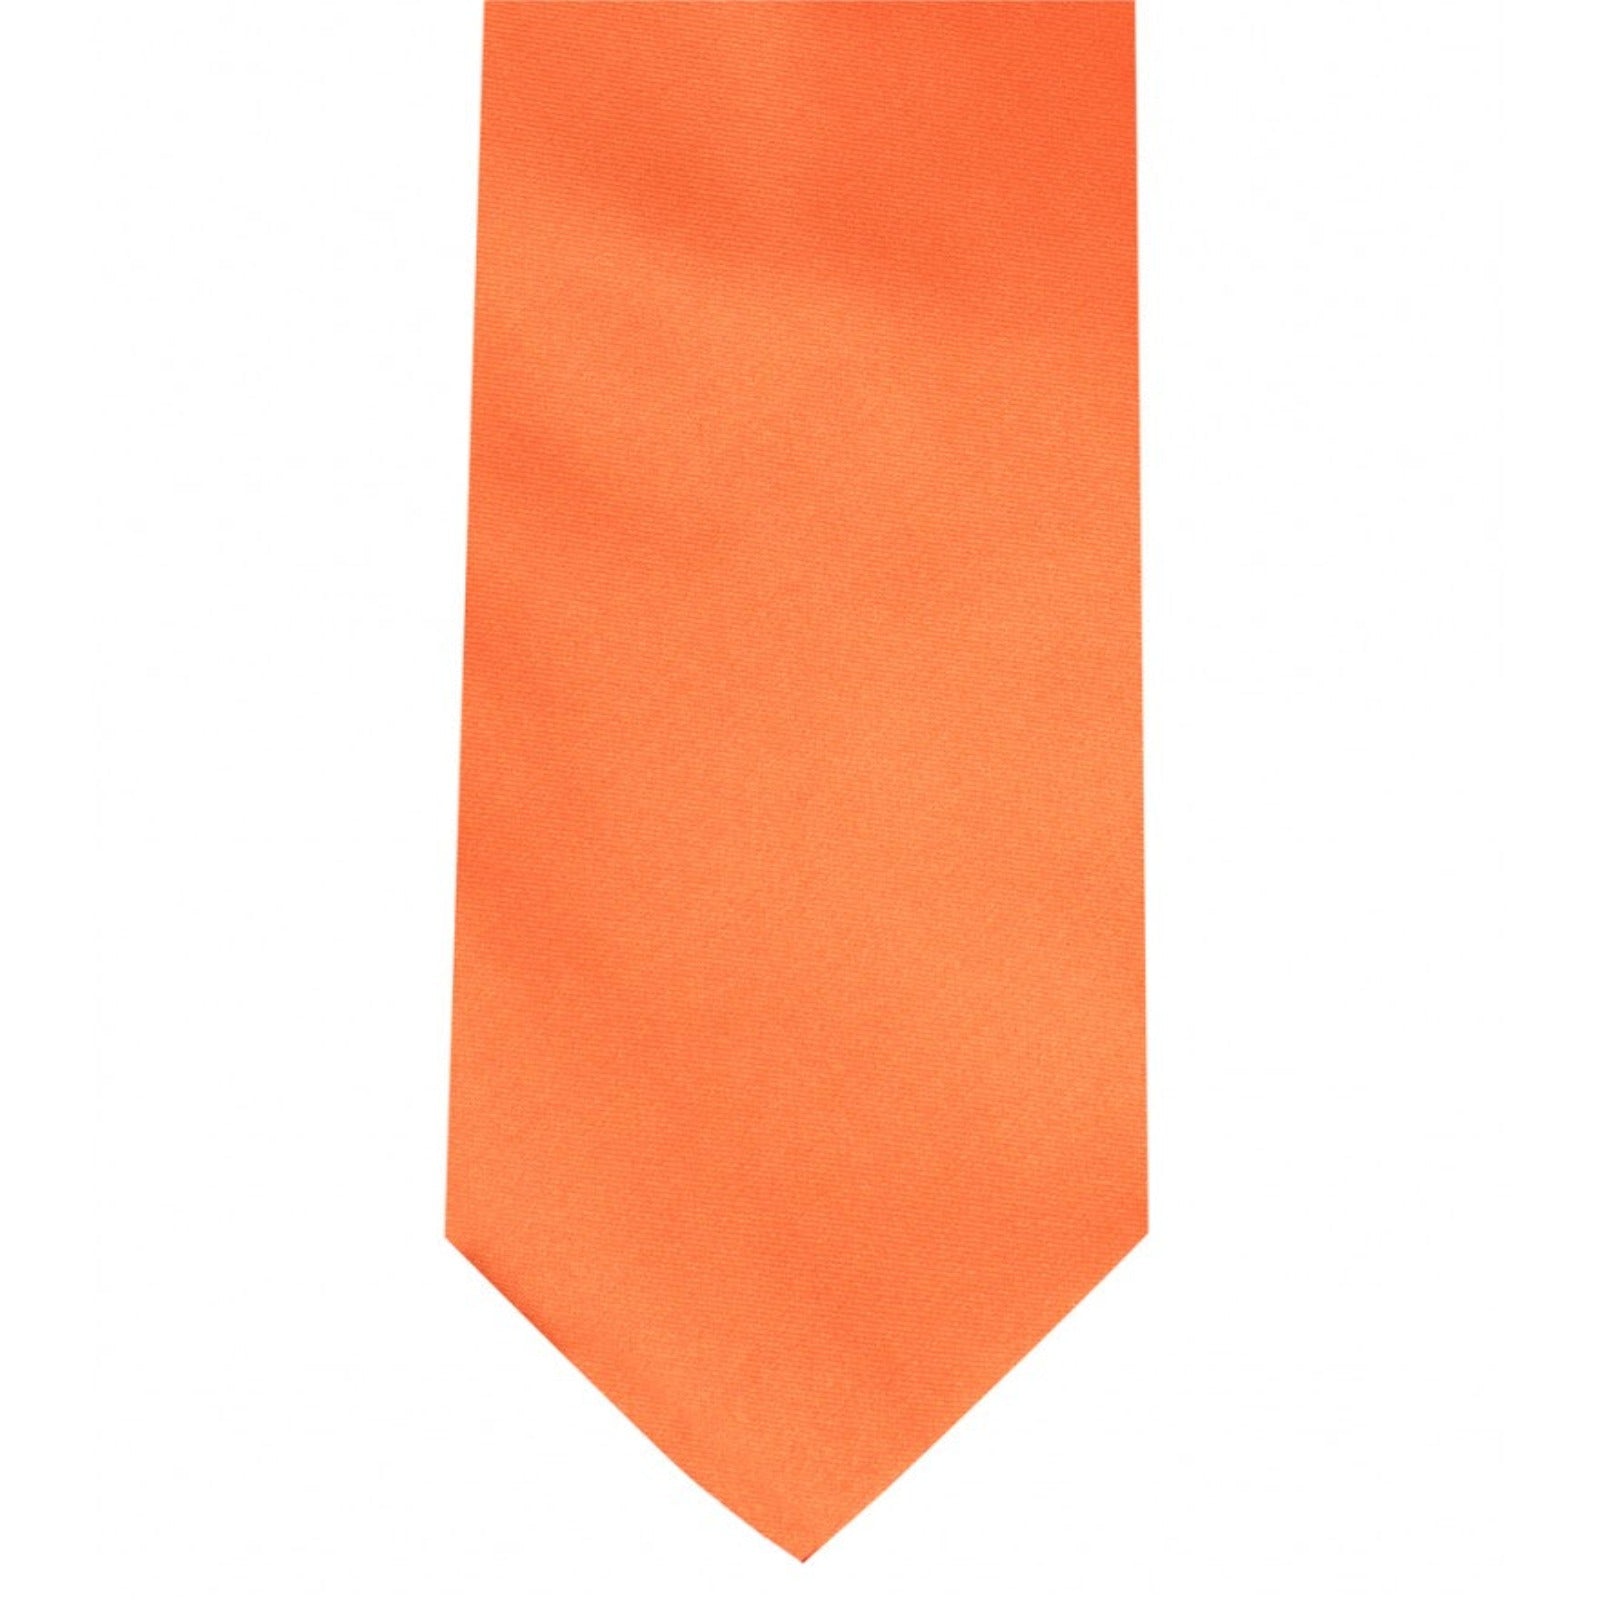 Classic Orange Tie Skinny width 2.75 inches With Matching Pocket Square | KCT Menswear